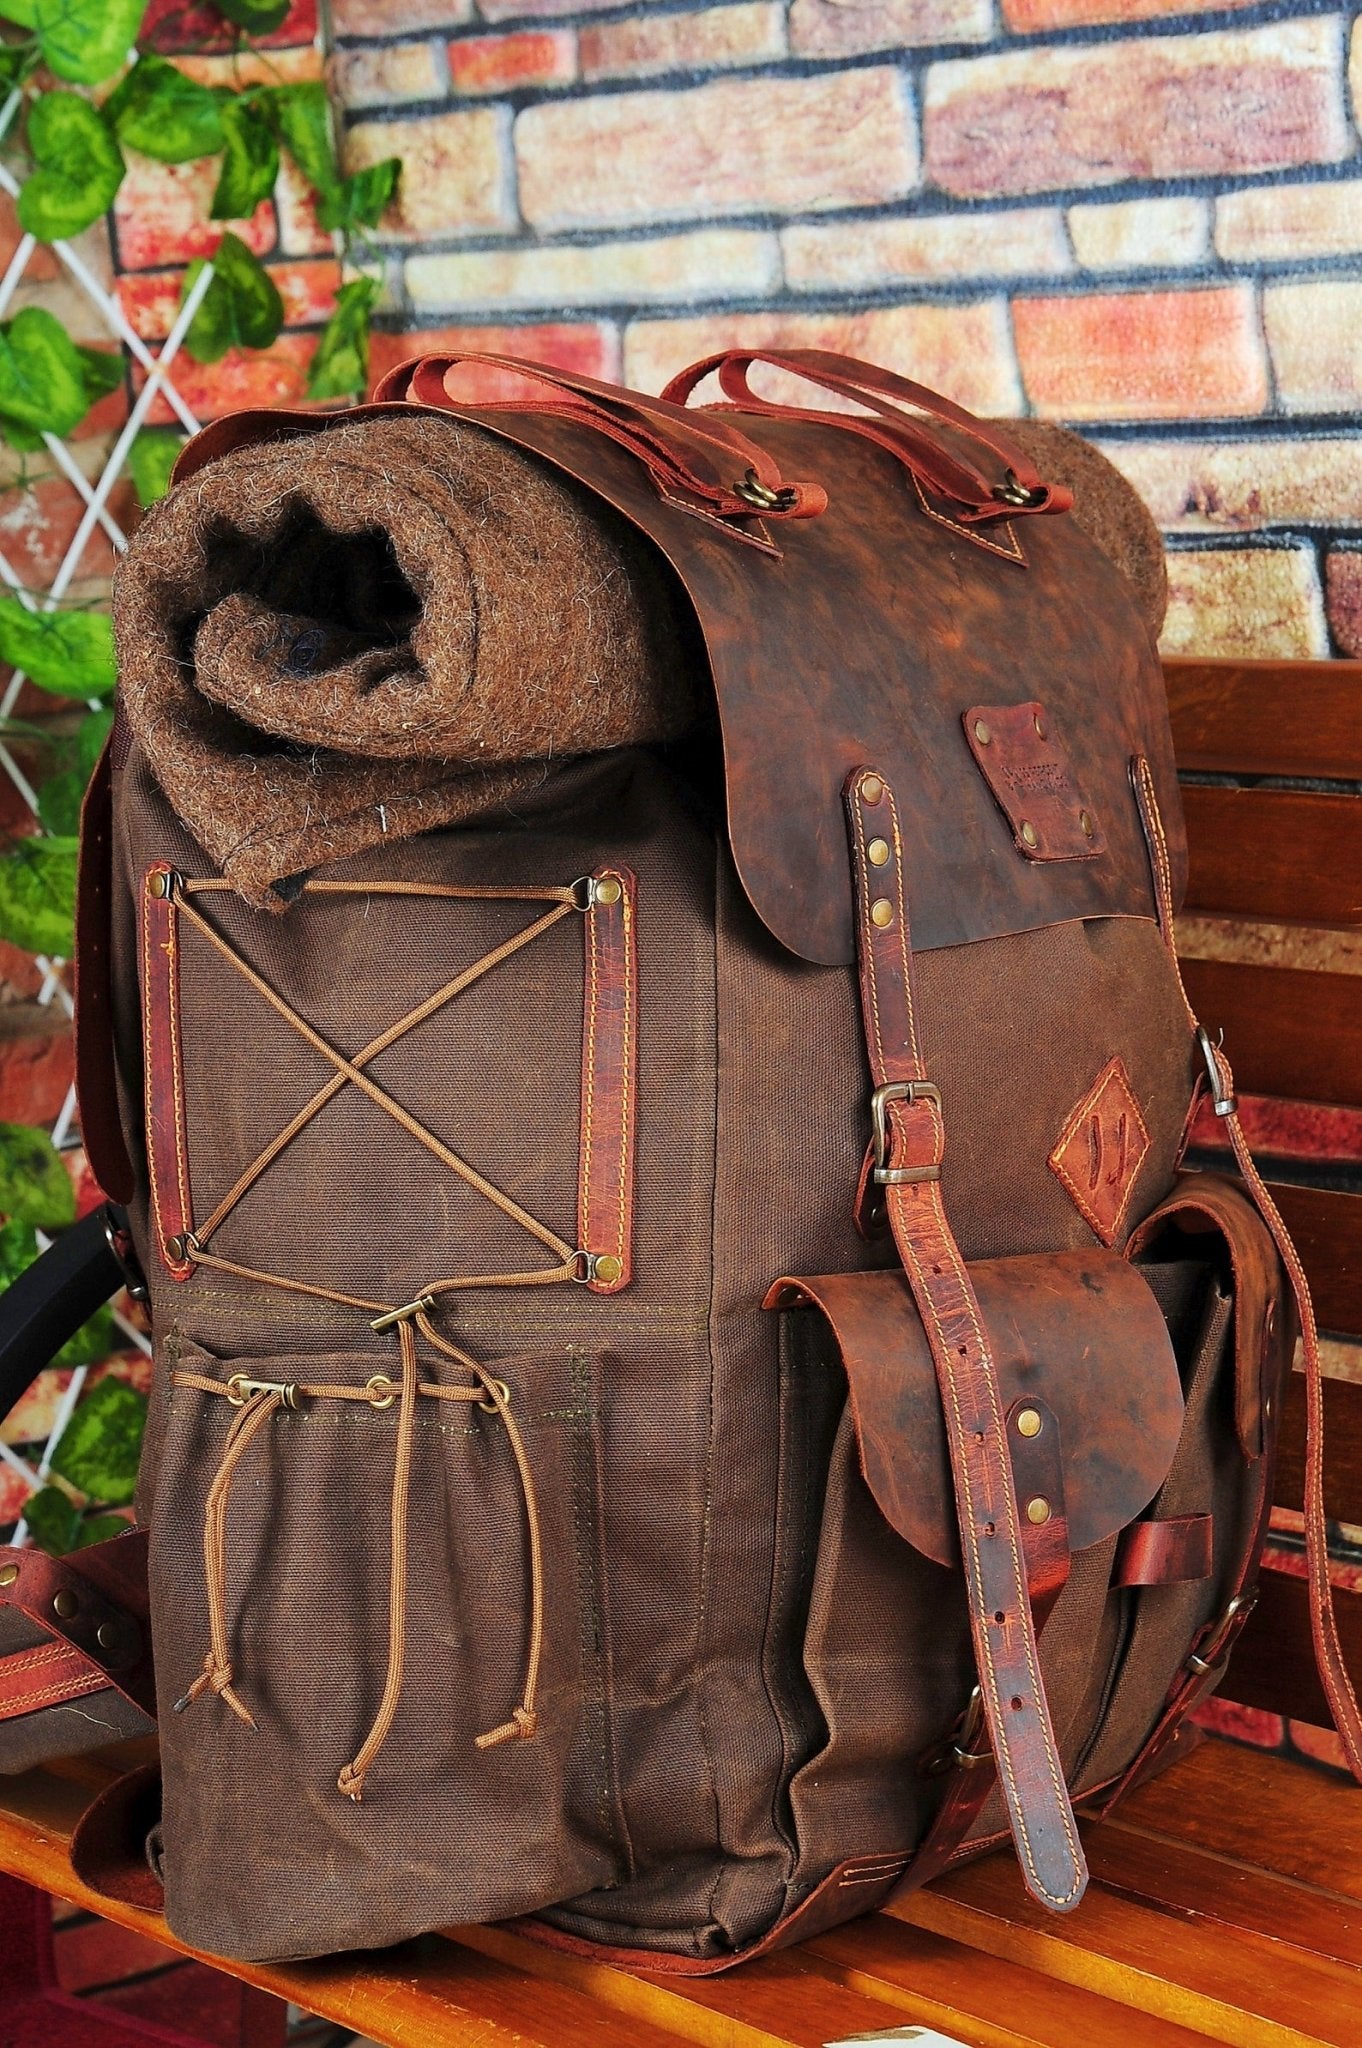 Bushcraft Backpack with Axe Holder | Handmade | Leather | Waxed Canvas Backpack | Camping, Hunting, Bushcraft, Travel  | Personalization bushcraft - camping - hiking backpack 99percenthandmade 30 Brown 